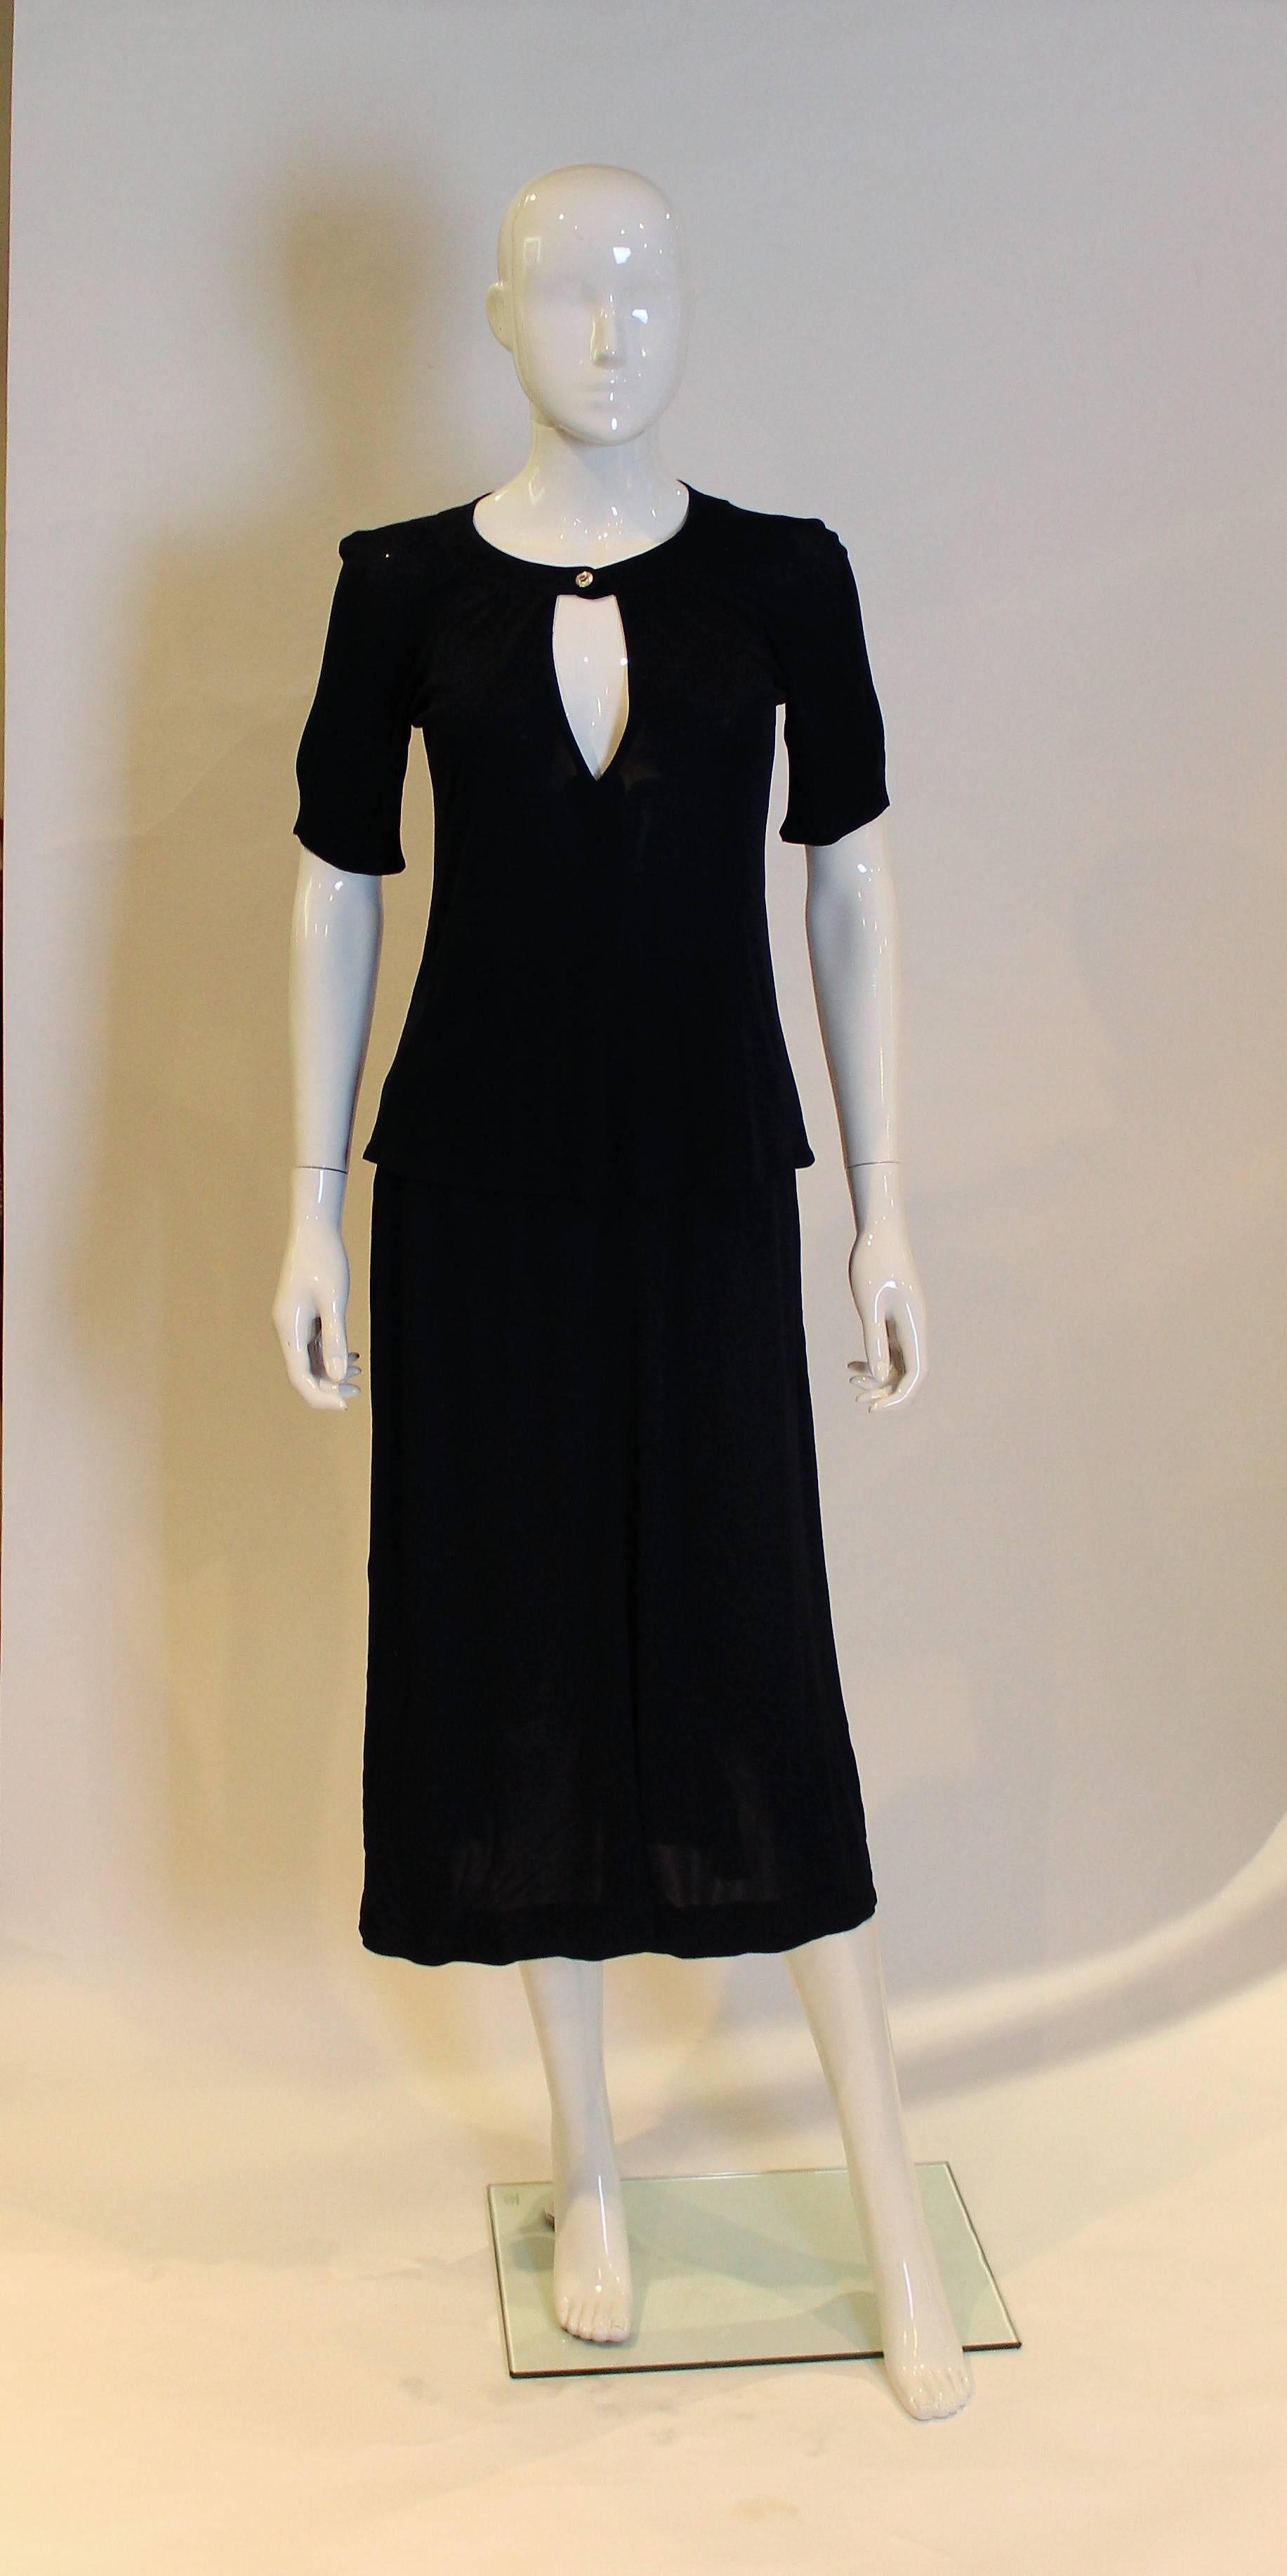 A chic and esy to wear outfit by Jean Muir. The top fastens with one button and has a large keyhole opening. The skirt  has pleast from below the waistband.
Top: Bust 33, length 22'', Skirt : waist 24'', length 31''
